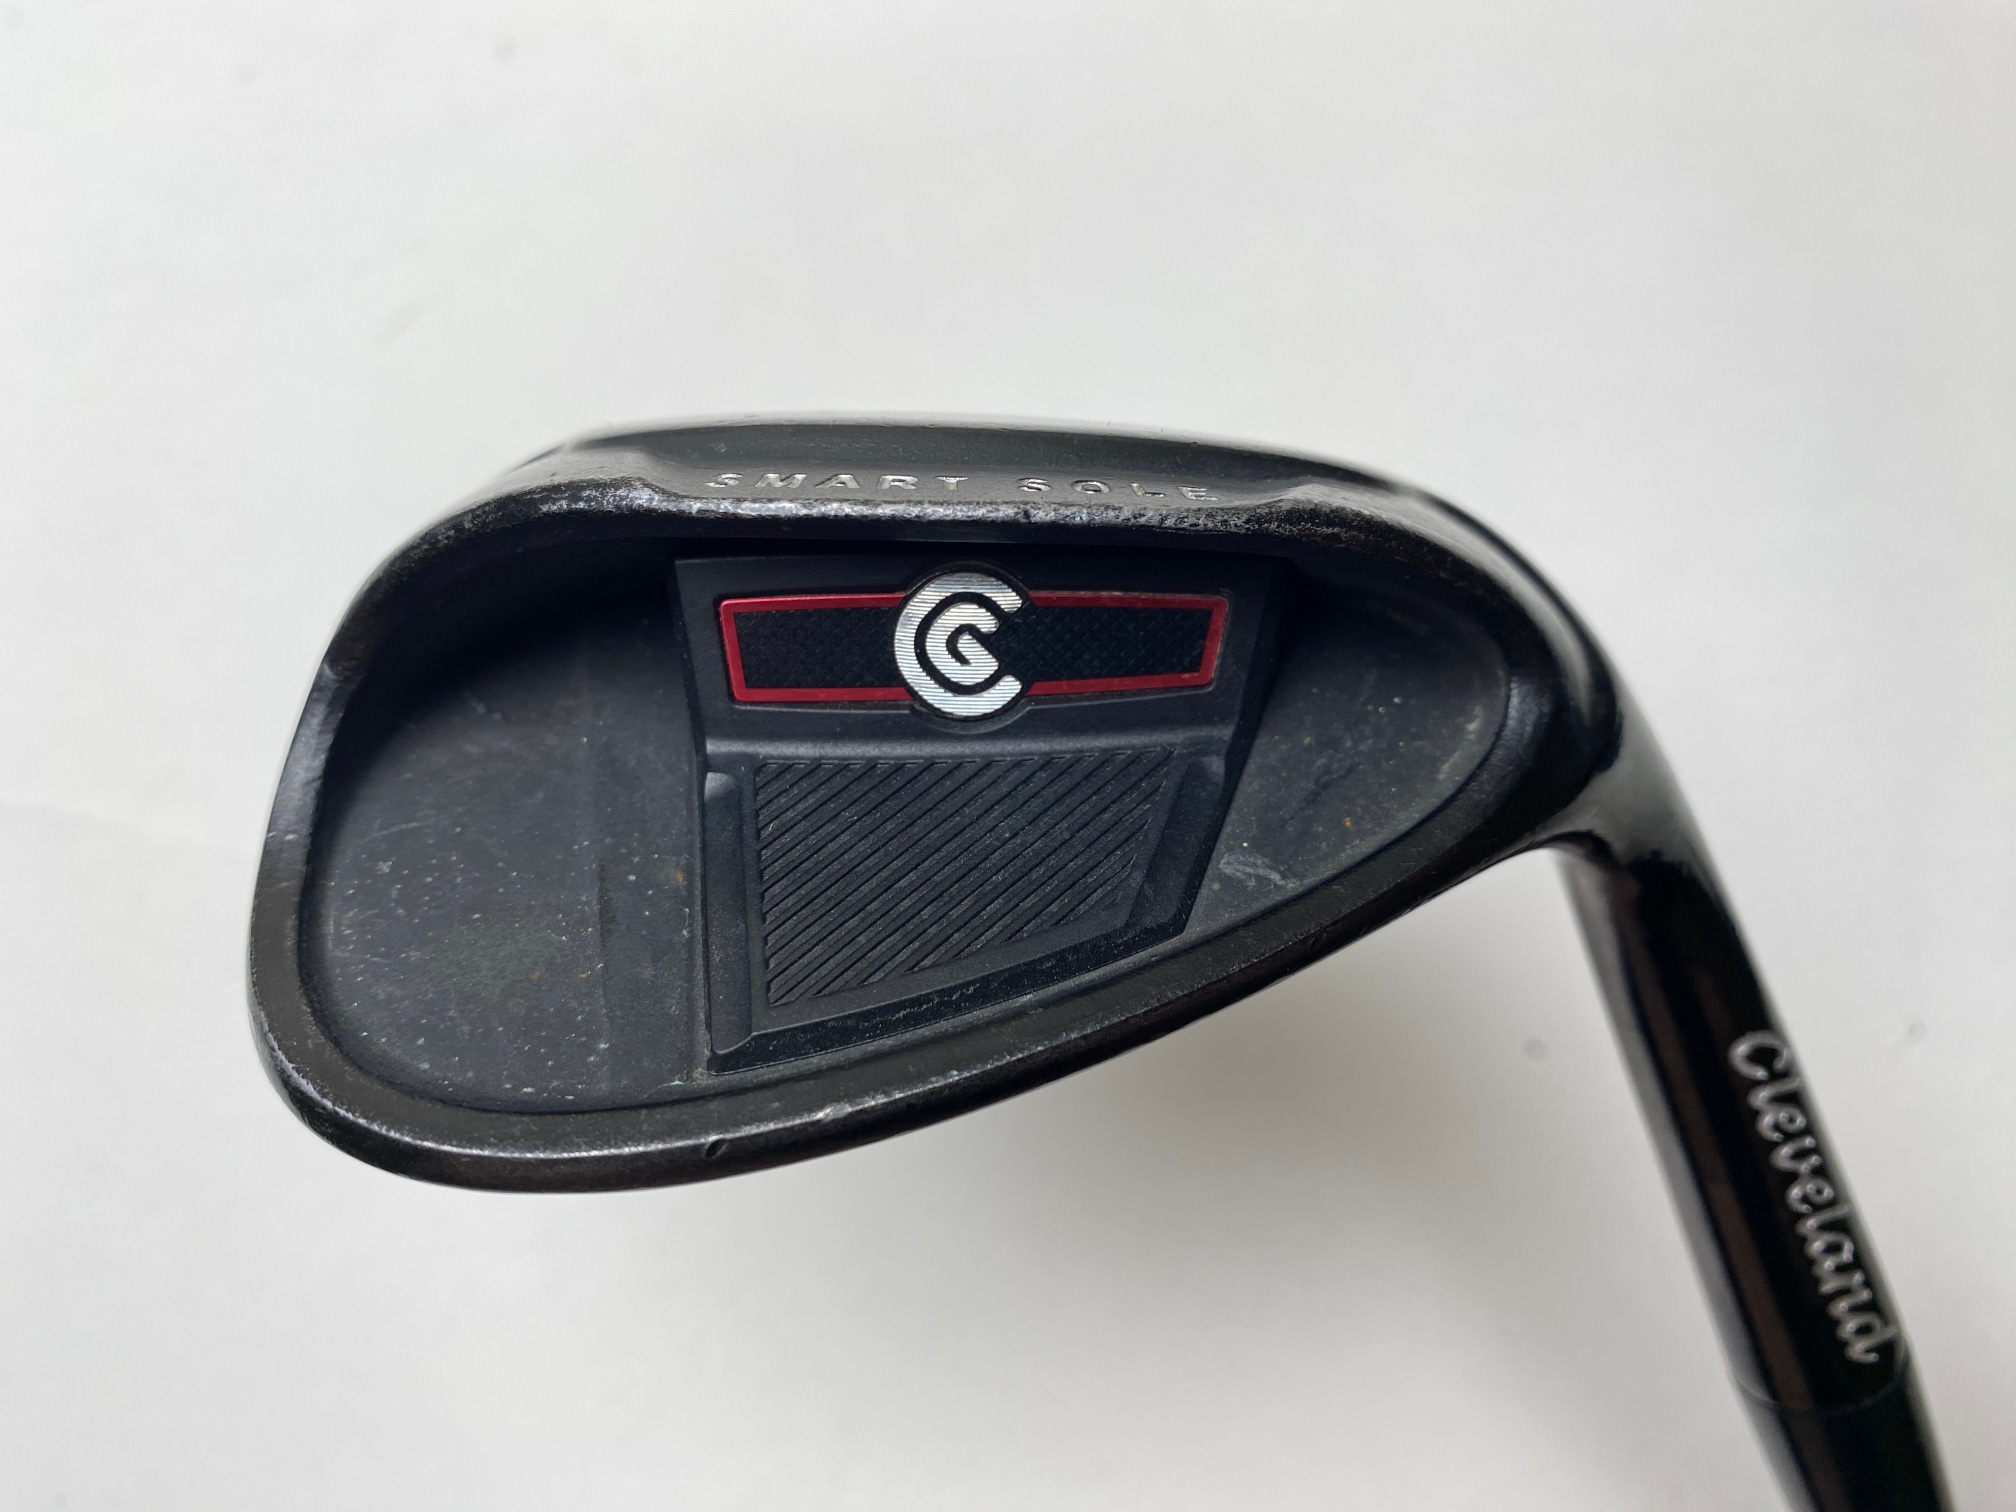 Cleveland Smart Sole 2.0 S Sand Wedge SW Action Wedge Graphite Womens RH